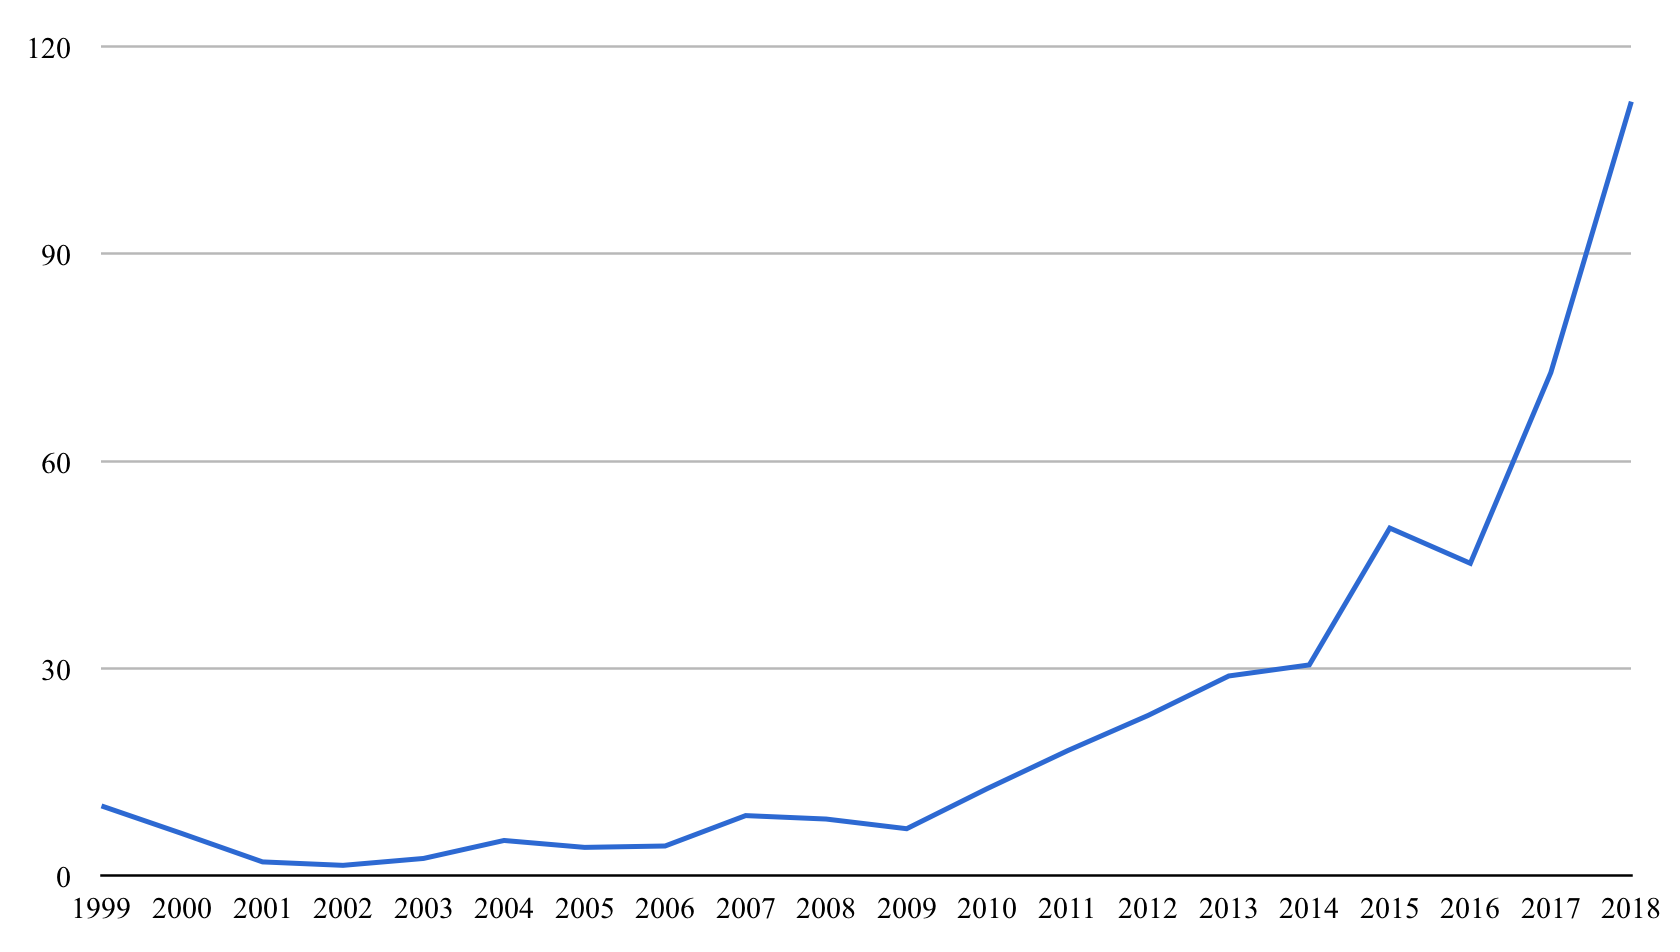 https commons wikimedia org wiki file net worth of jeff bezos from 1999 to 2018 png